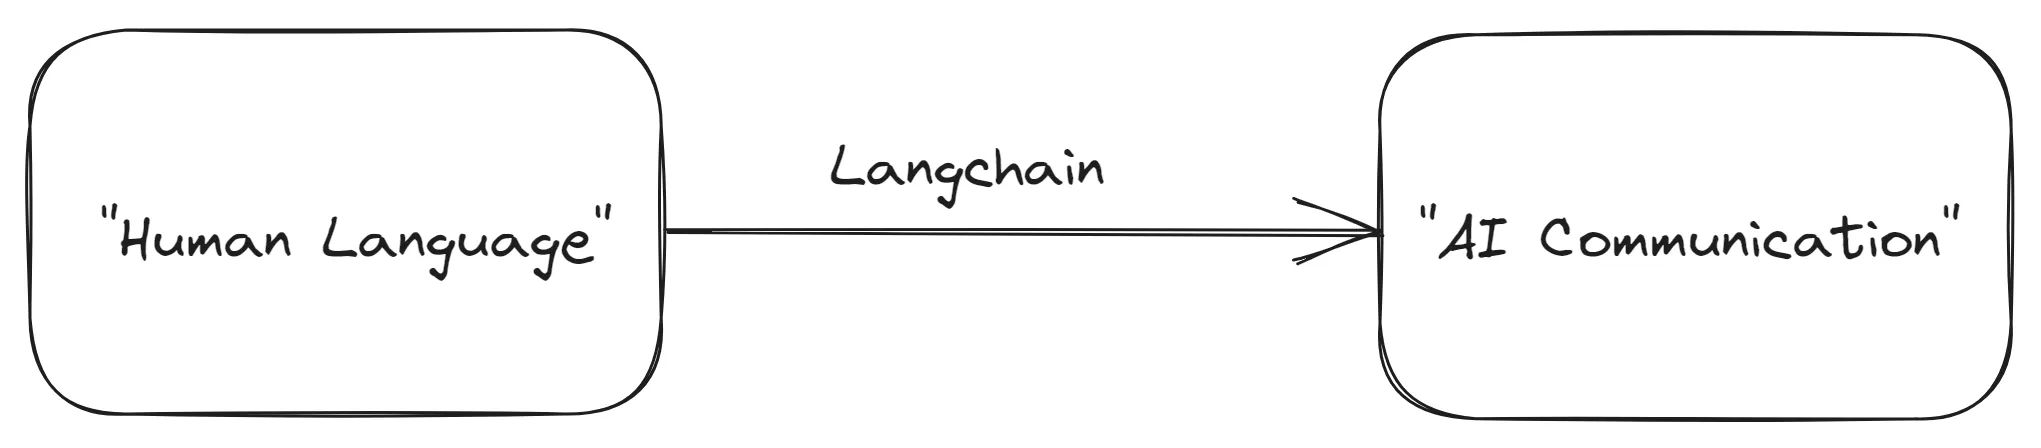 What is Langchain and How it is Related to AI